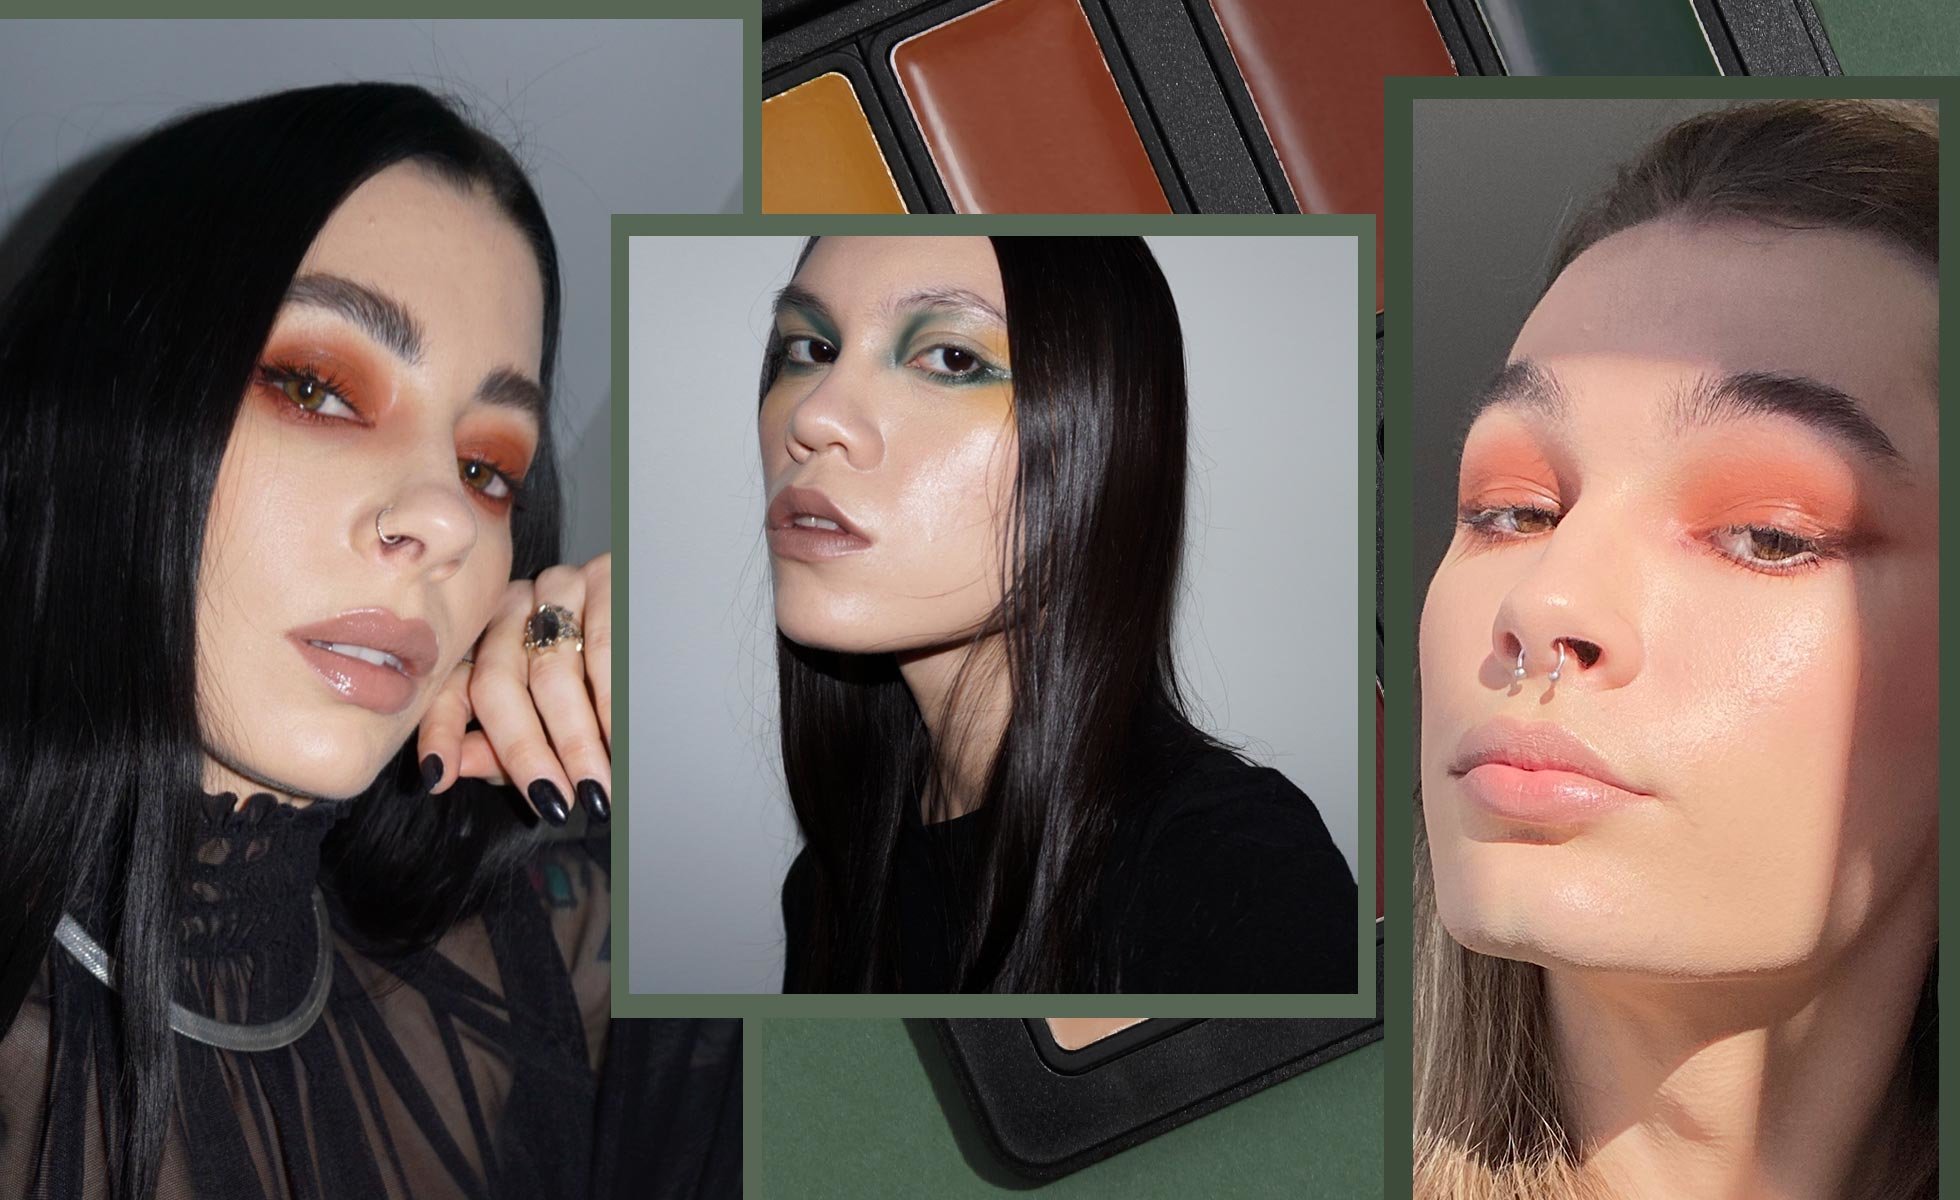 How To Wear The Soft Goth Make-Up Trend